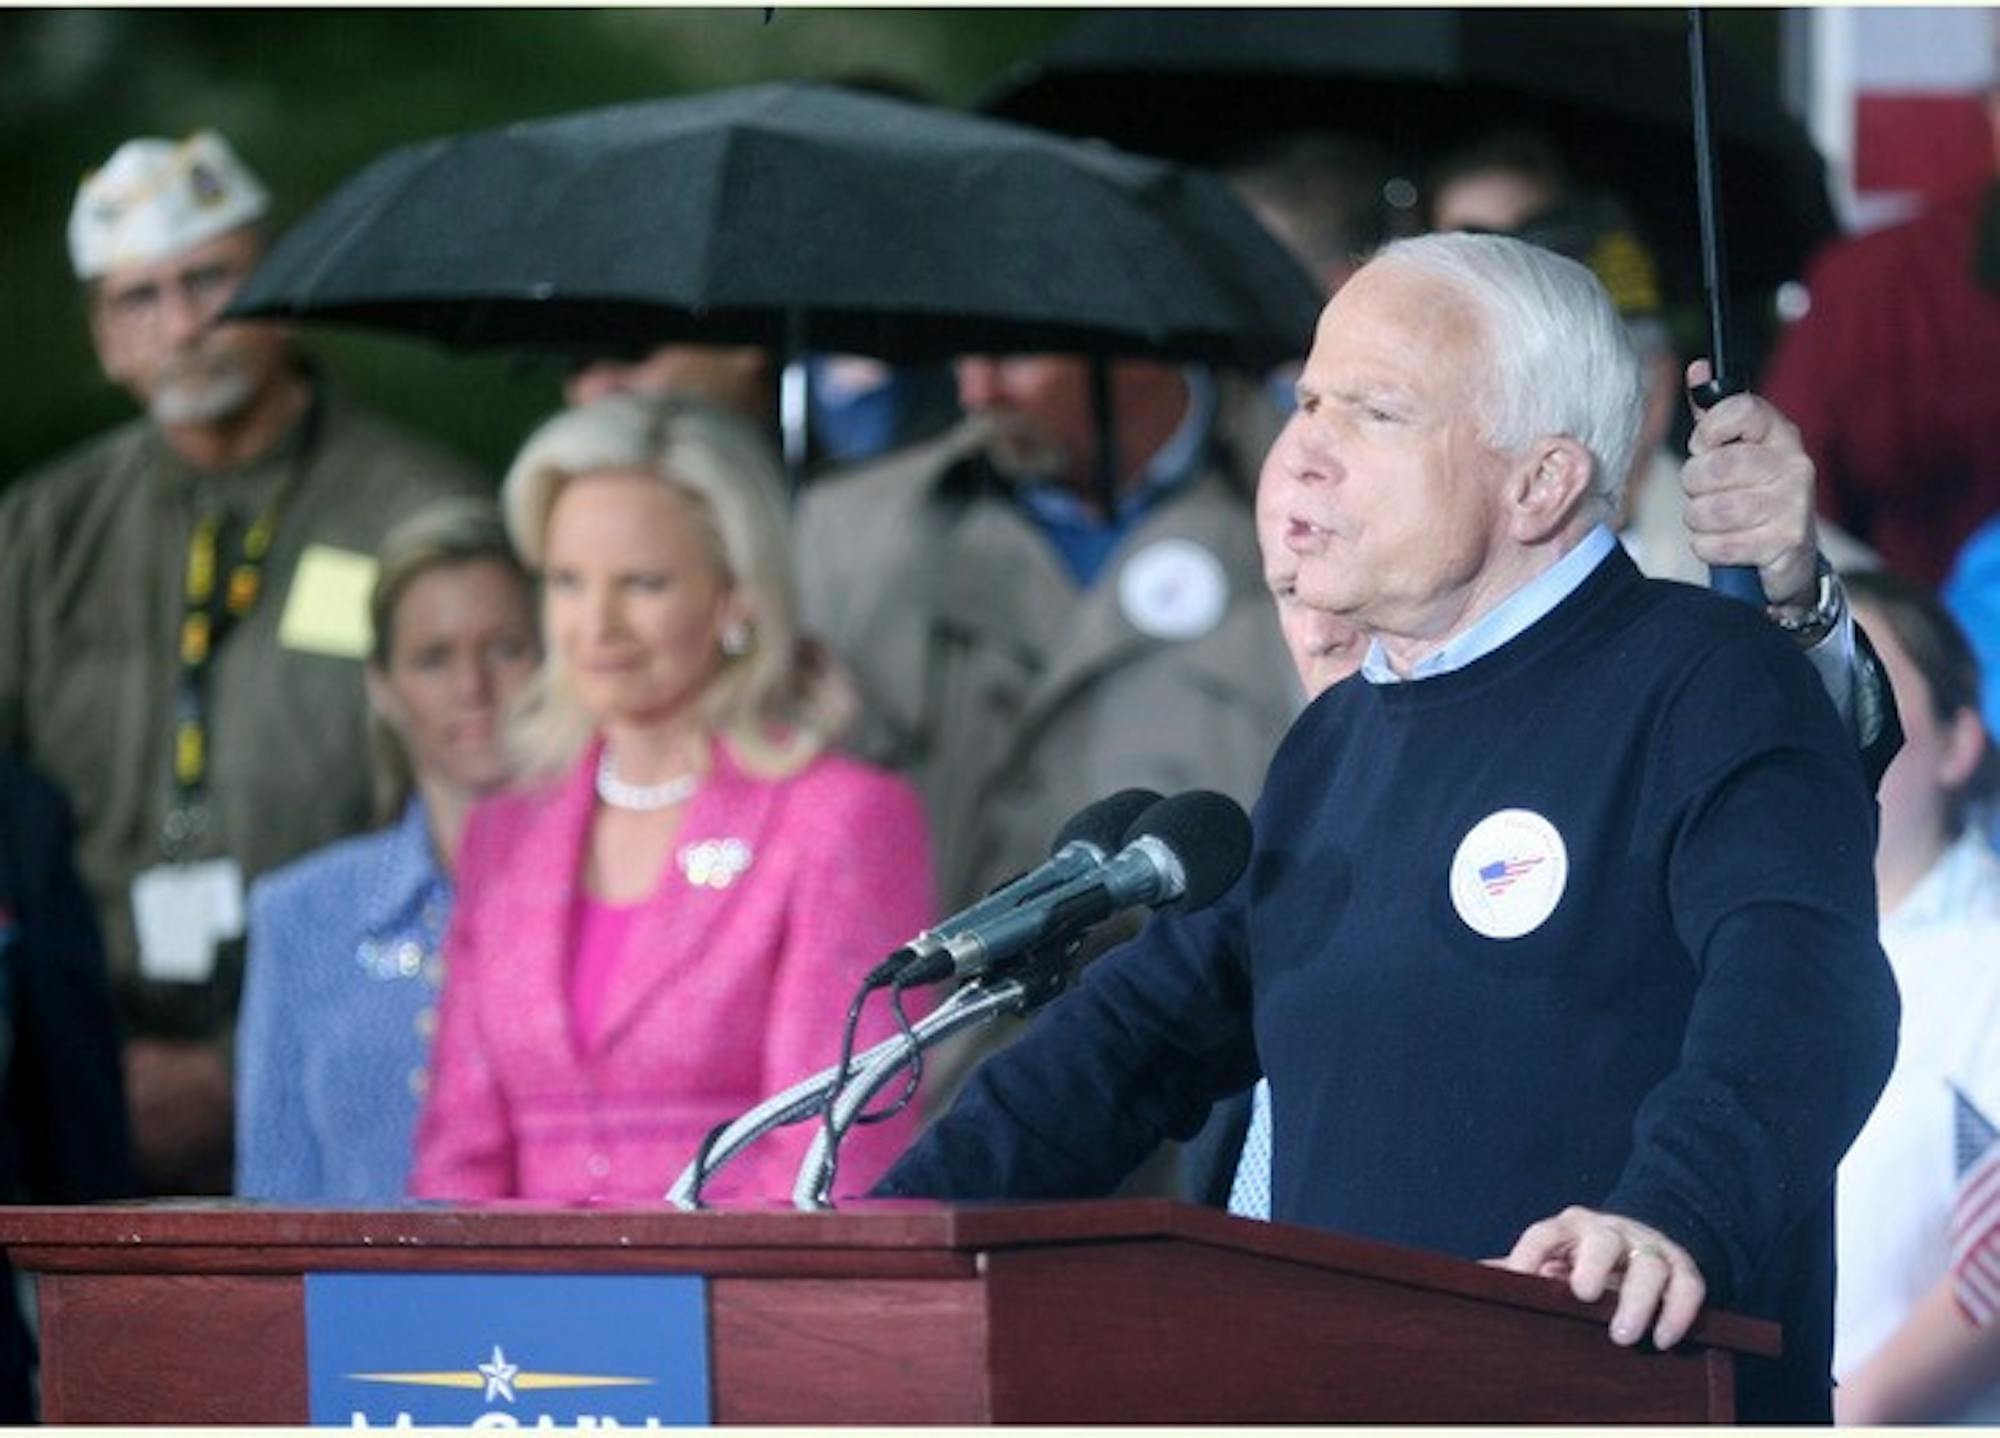 Sheltered from the rain, Sen. John McCain, R-Ariz., speaks to a crowd of 200 in Veteran Memorial Park in Manchester, N.H., hours after officially announcing his presidential candidacy.